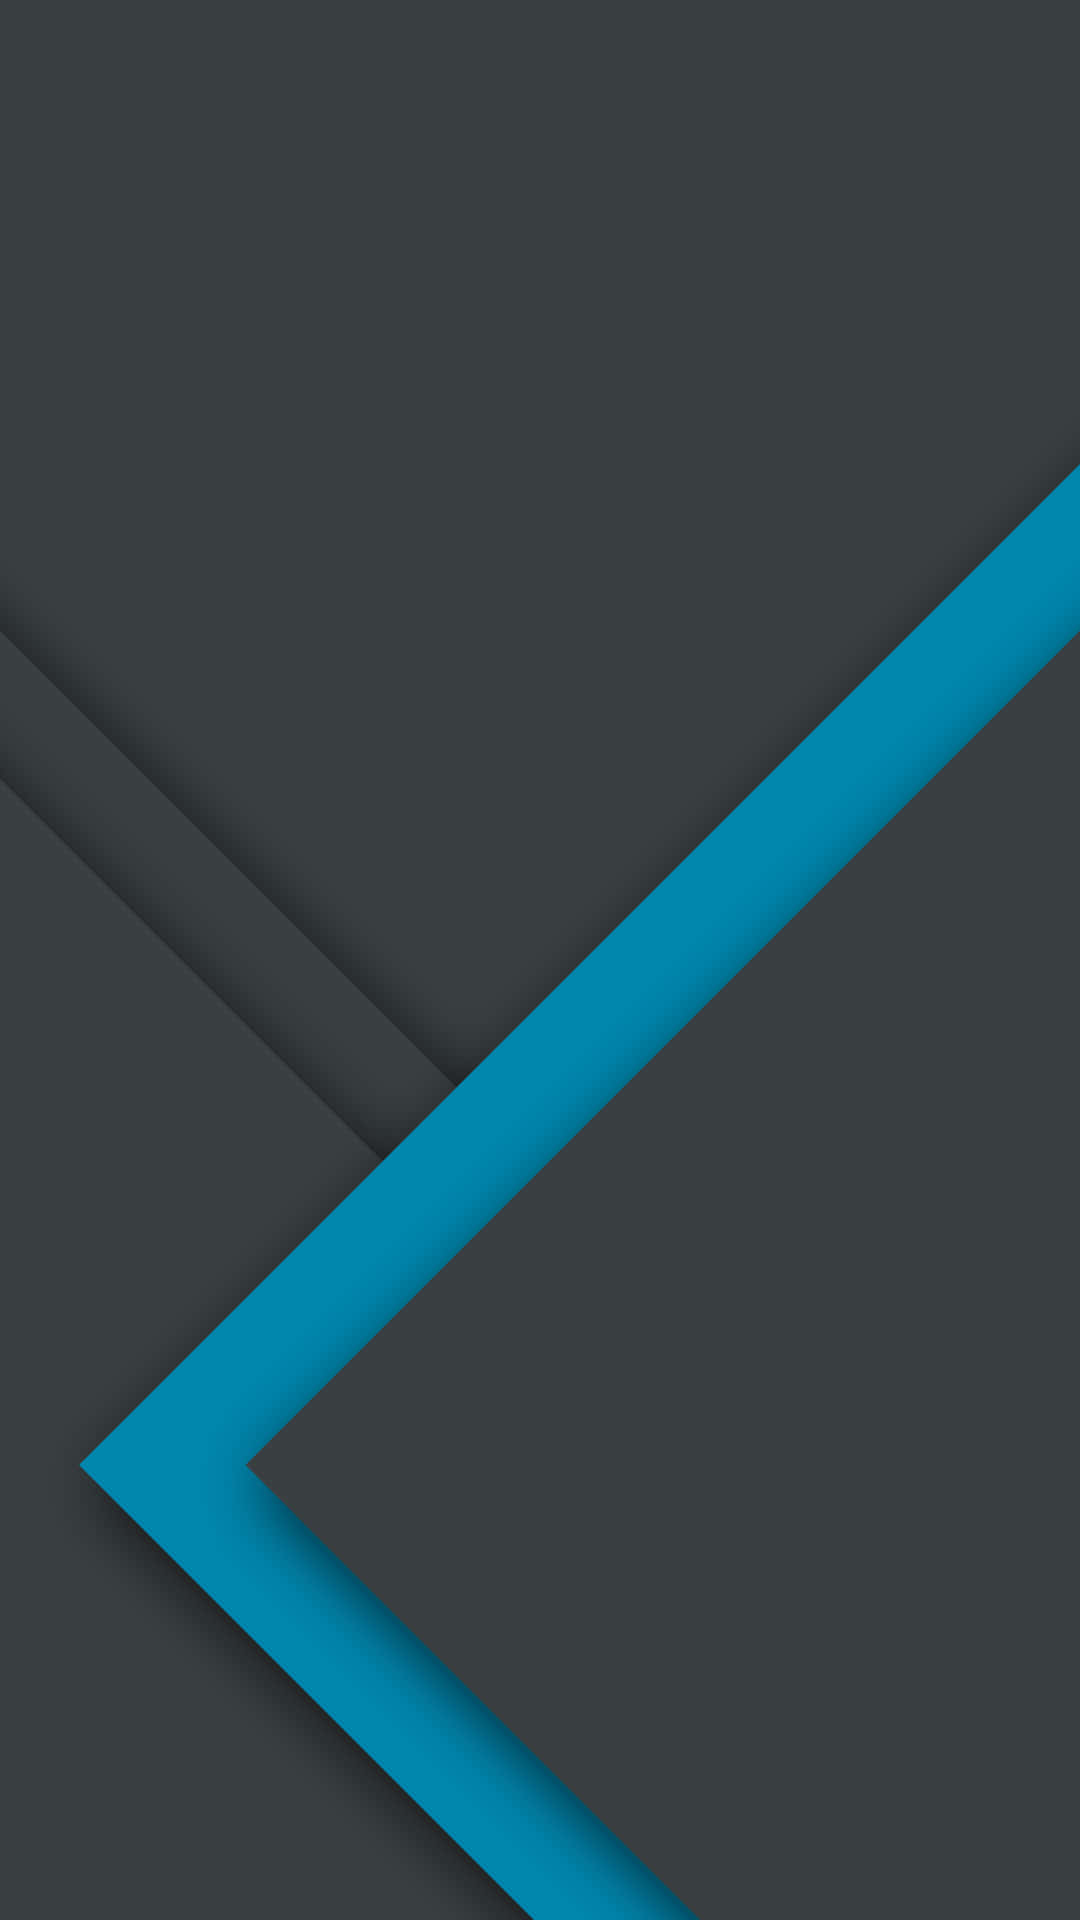 A Blue And Black Background With A Blue Arrow Background